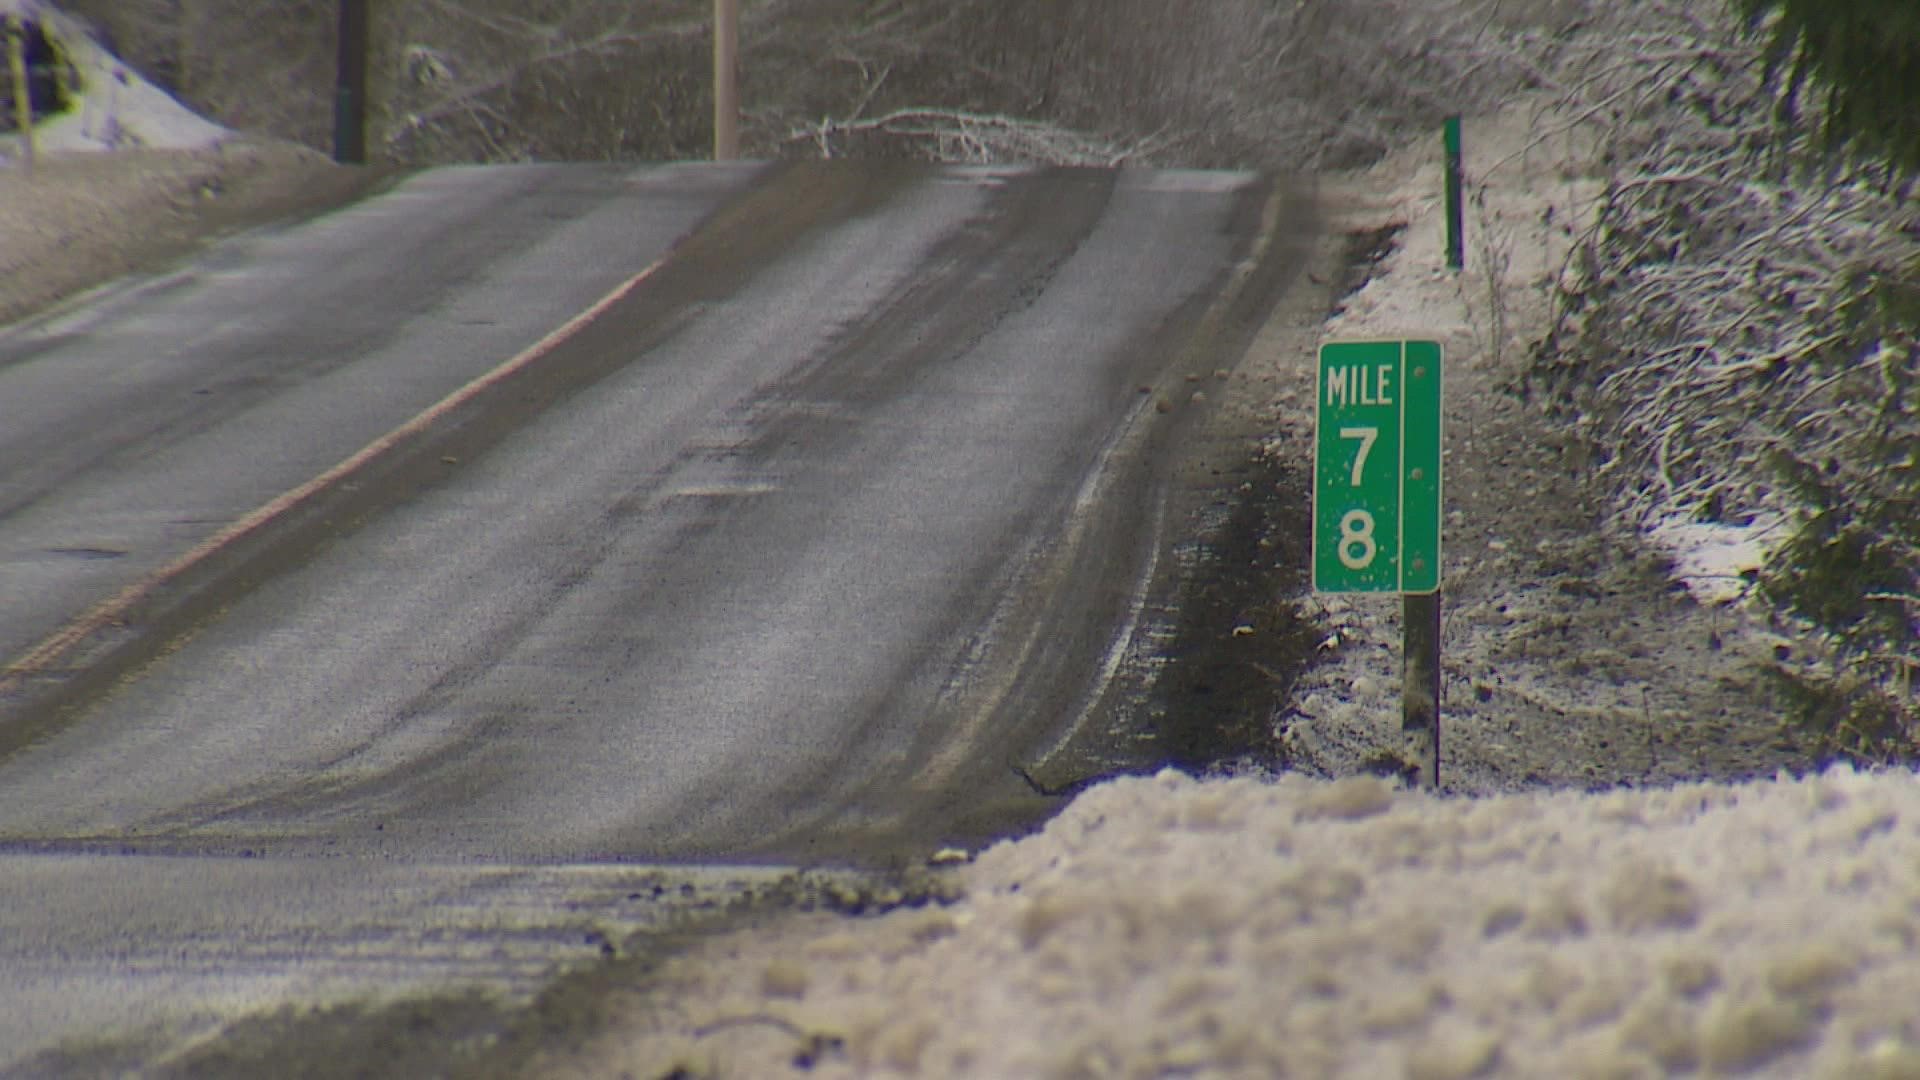 The fatal crash comes amid continued snowfall across the region, especially in the northern areas of Puget Sound.